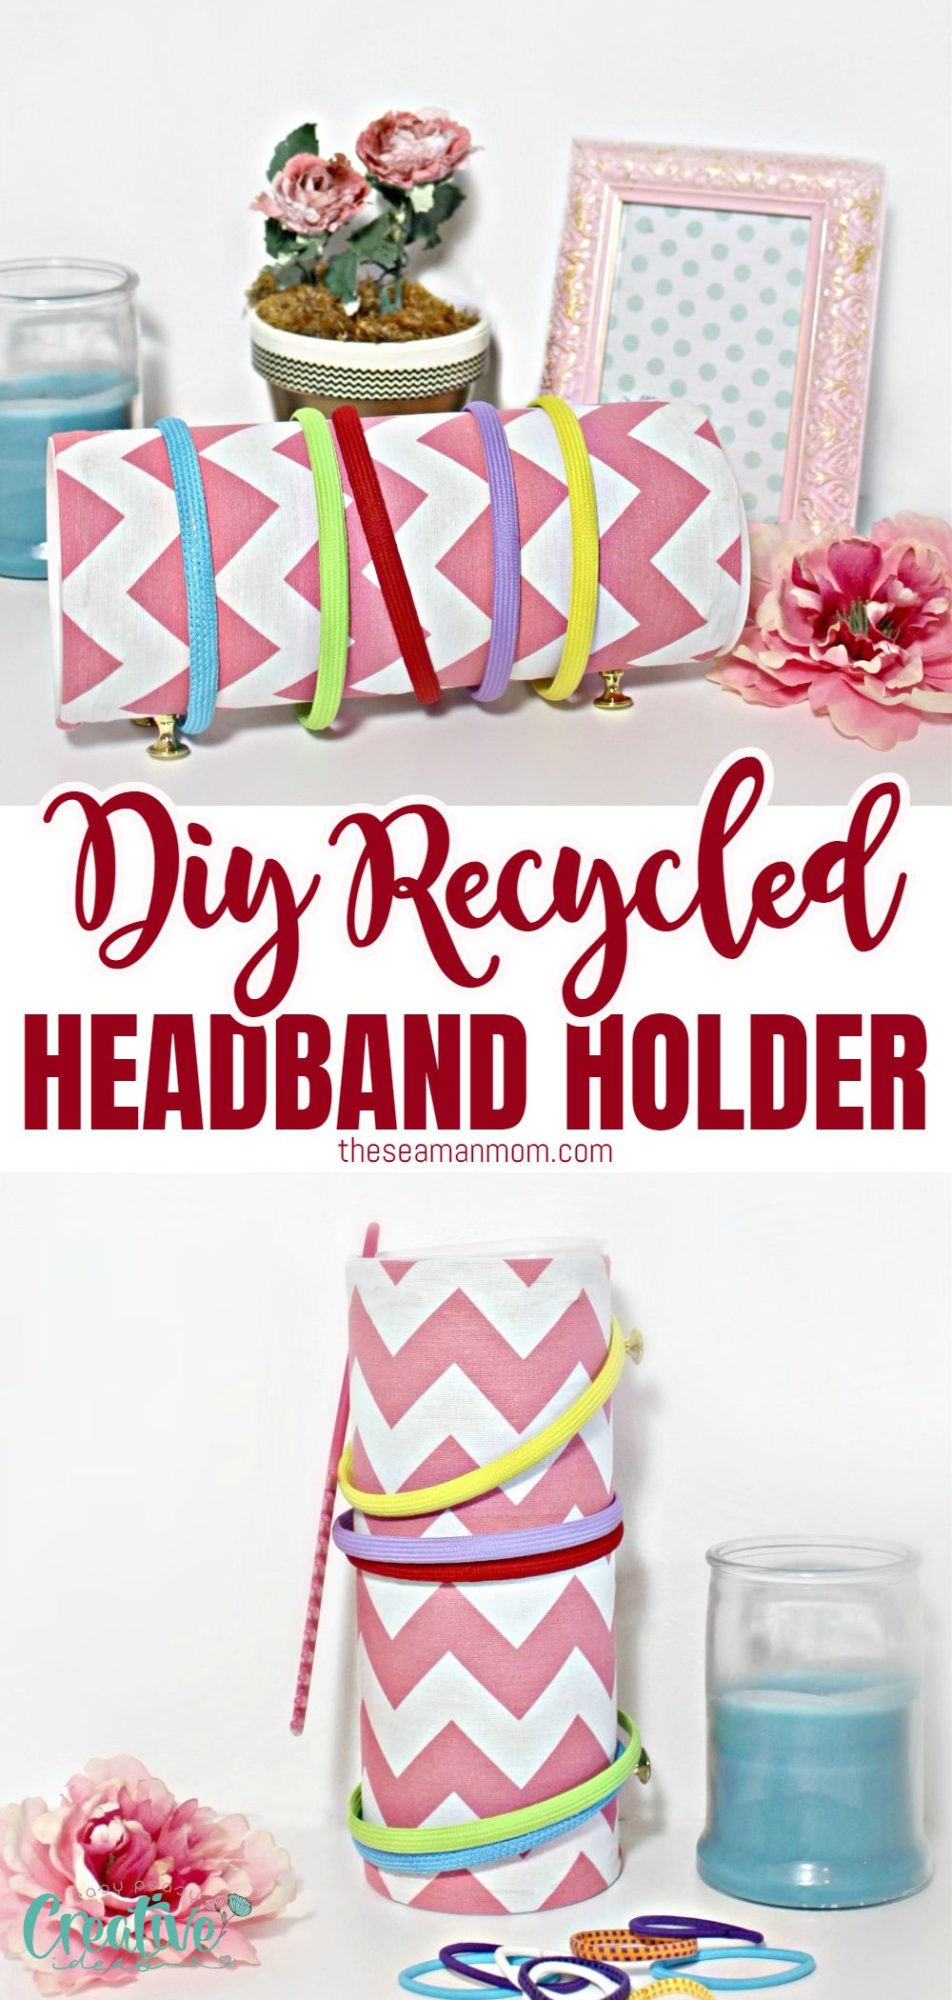 Photo collage of a headband holder in a horizontal and upright position